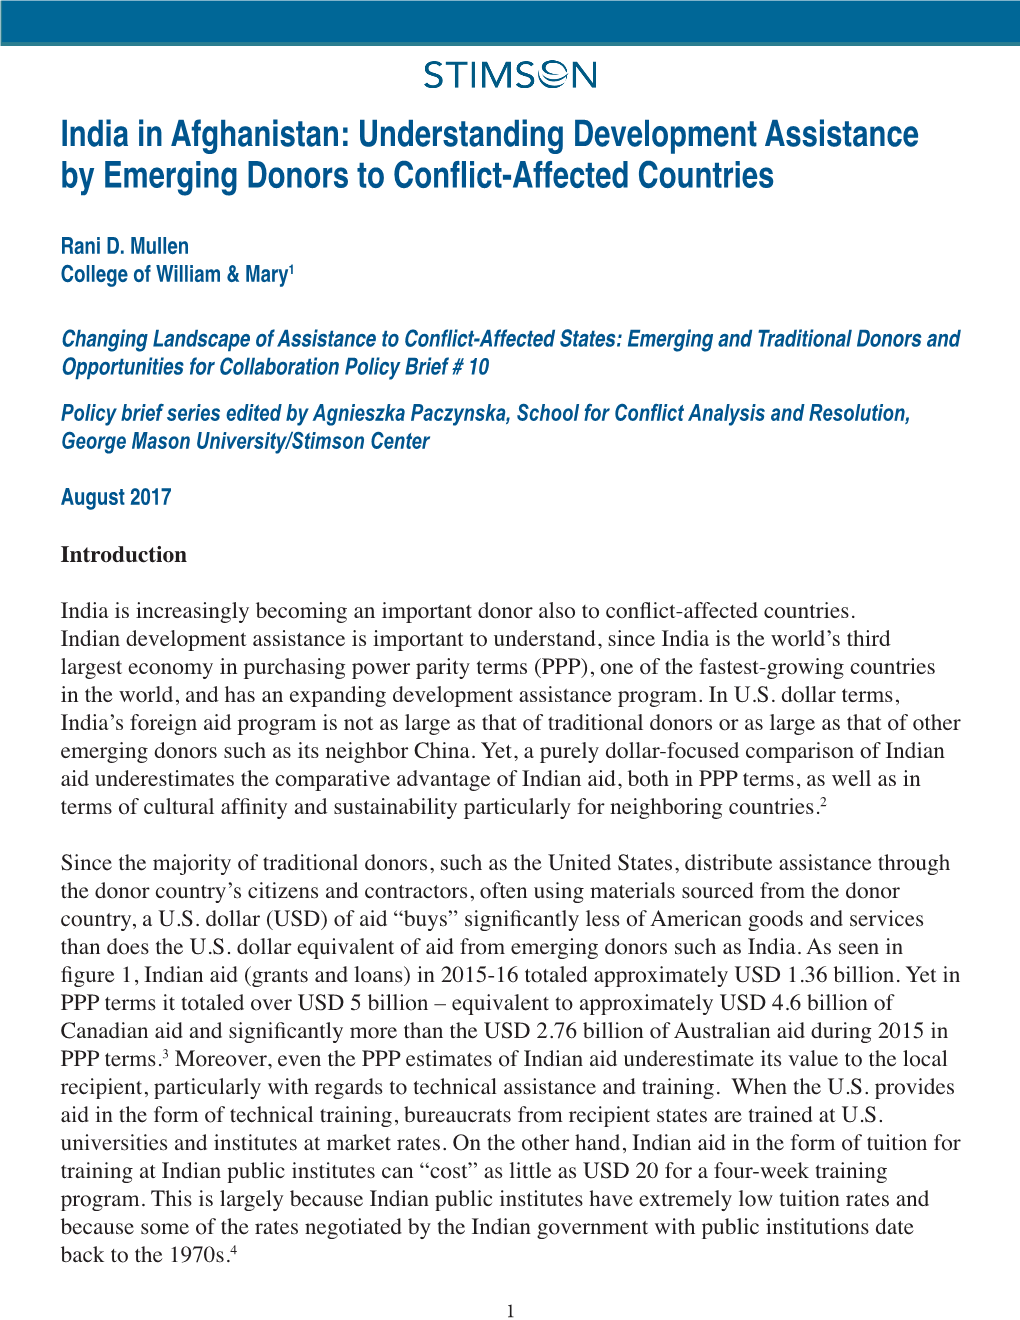 India in Afghanistan: Understanding Development Assistance by Emerging Donors to Conflict-Affected Countries